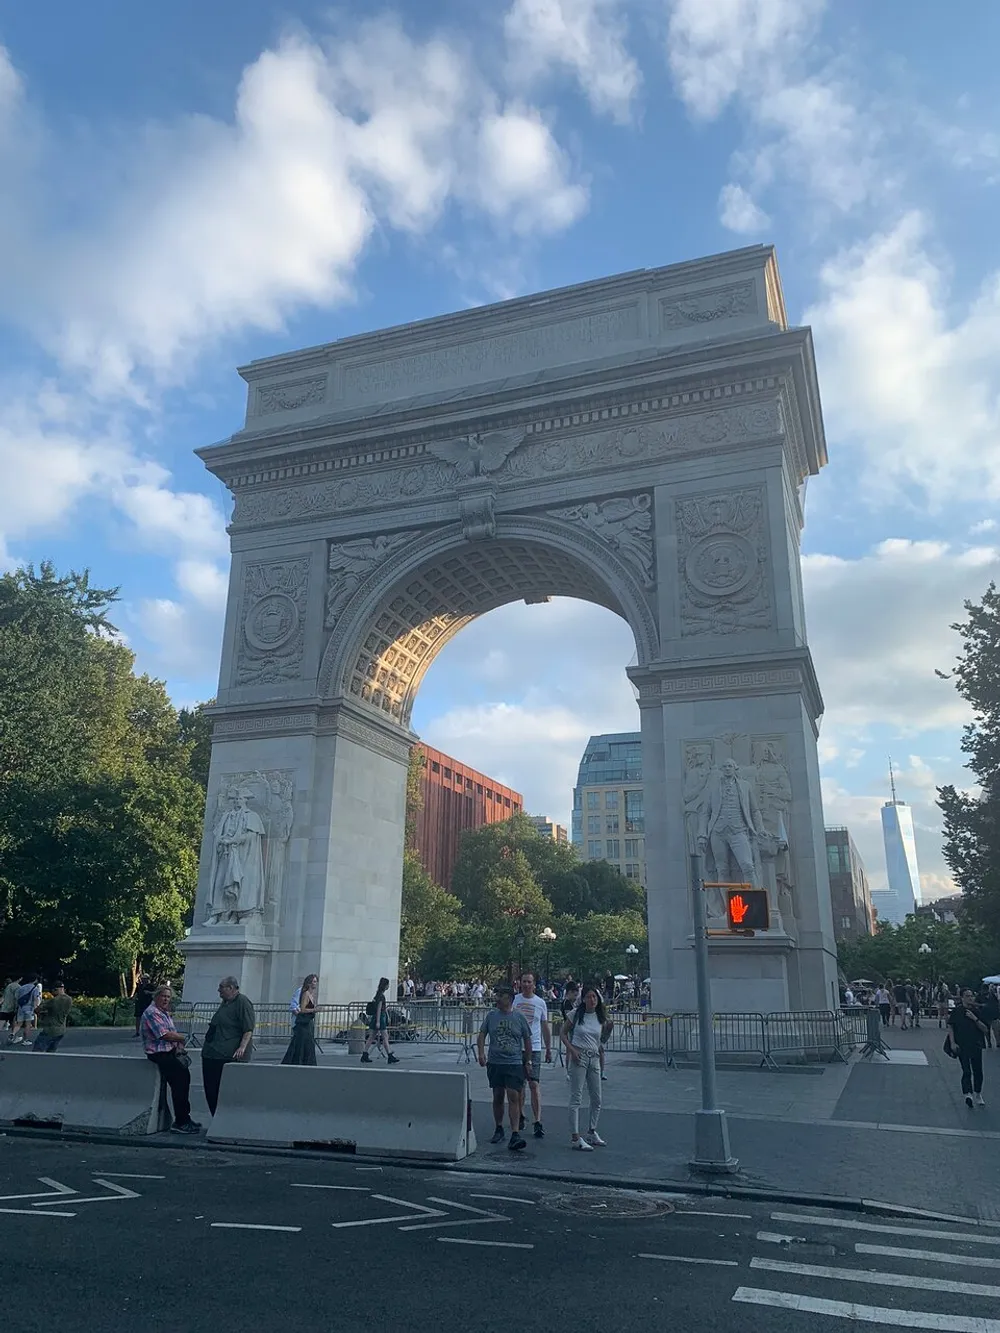 The image shows the Washington Square Arch in New York with people walking around and the One World Trade Center visible in the background under a partly cloudy sky